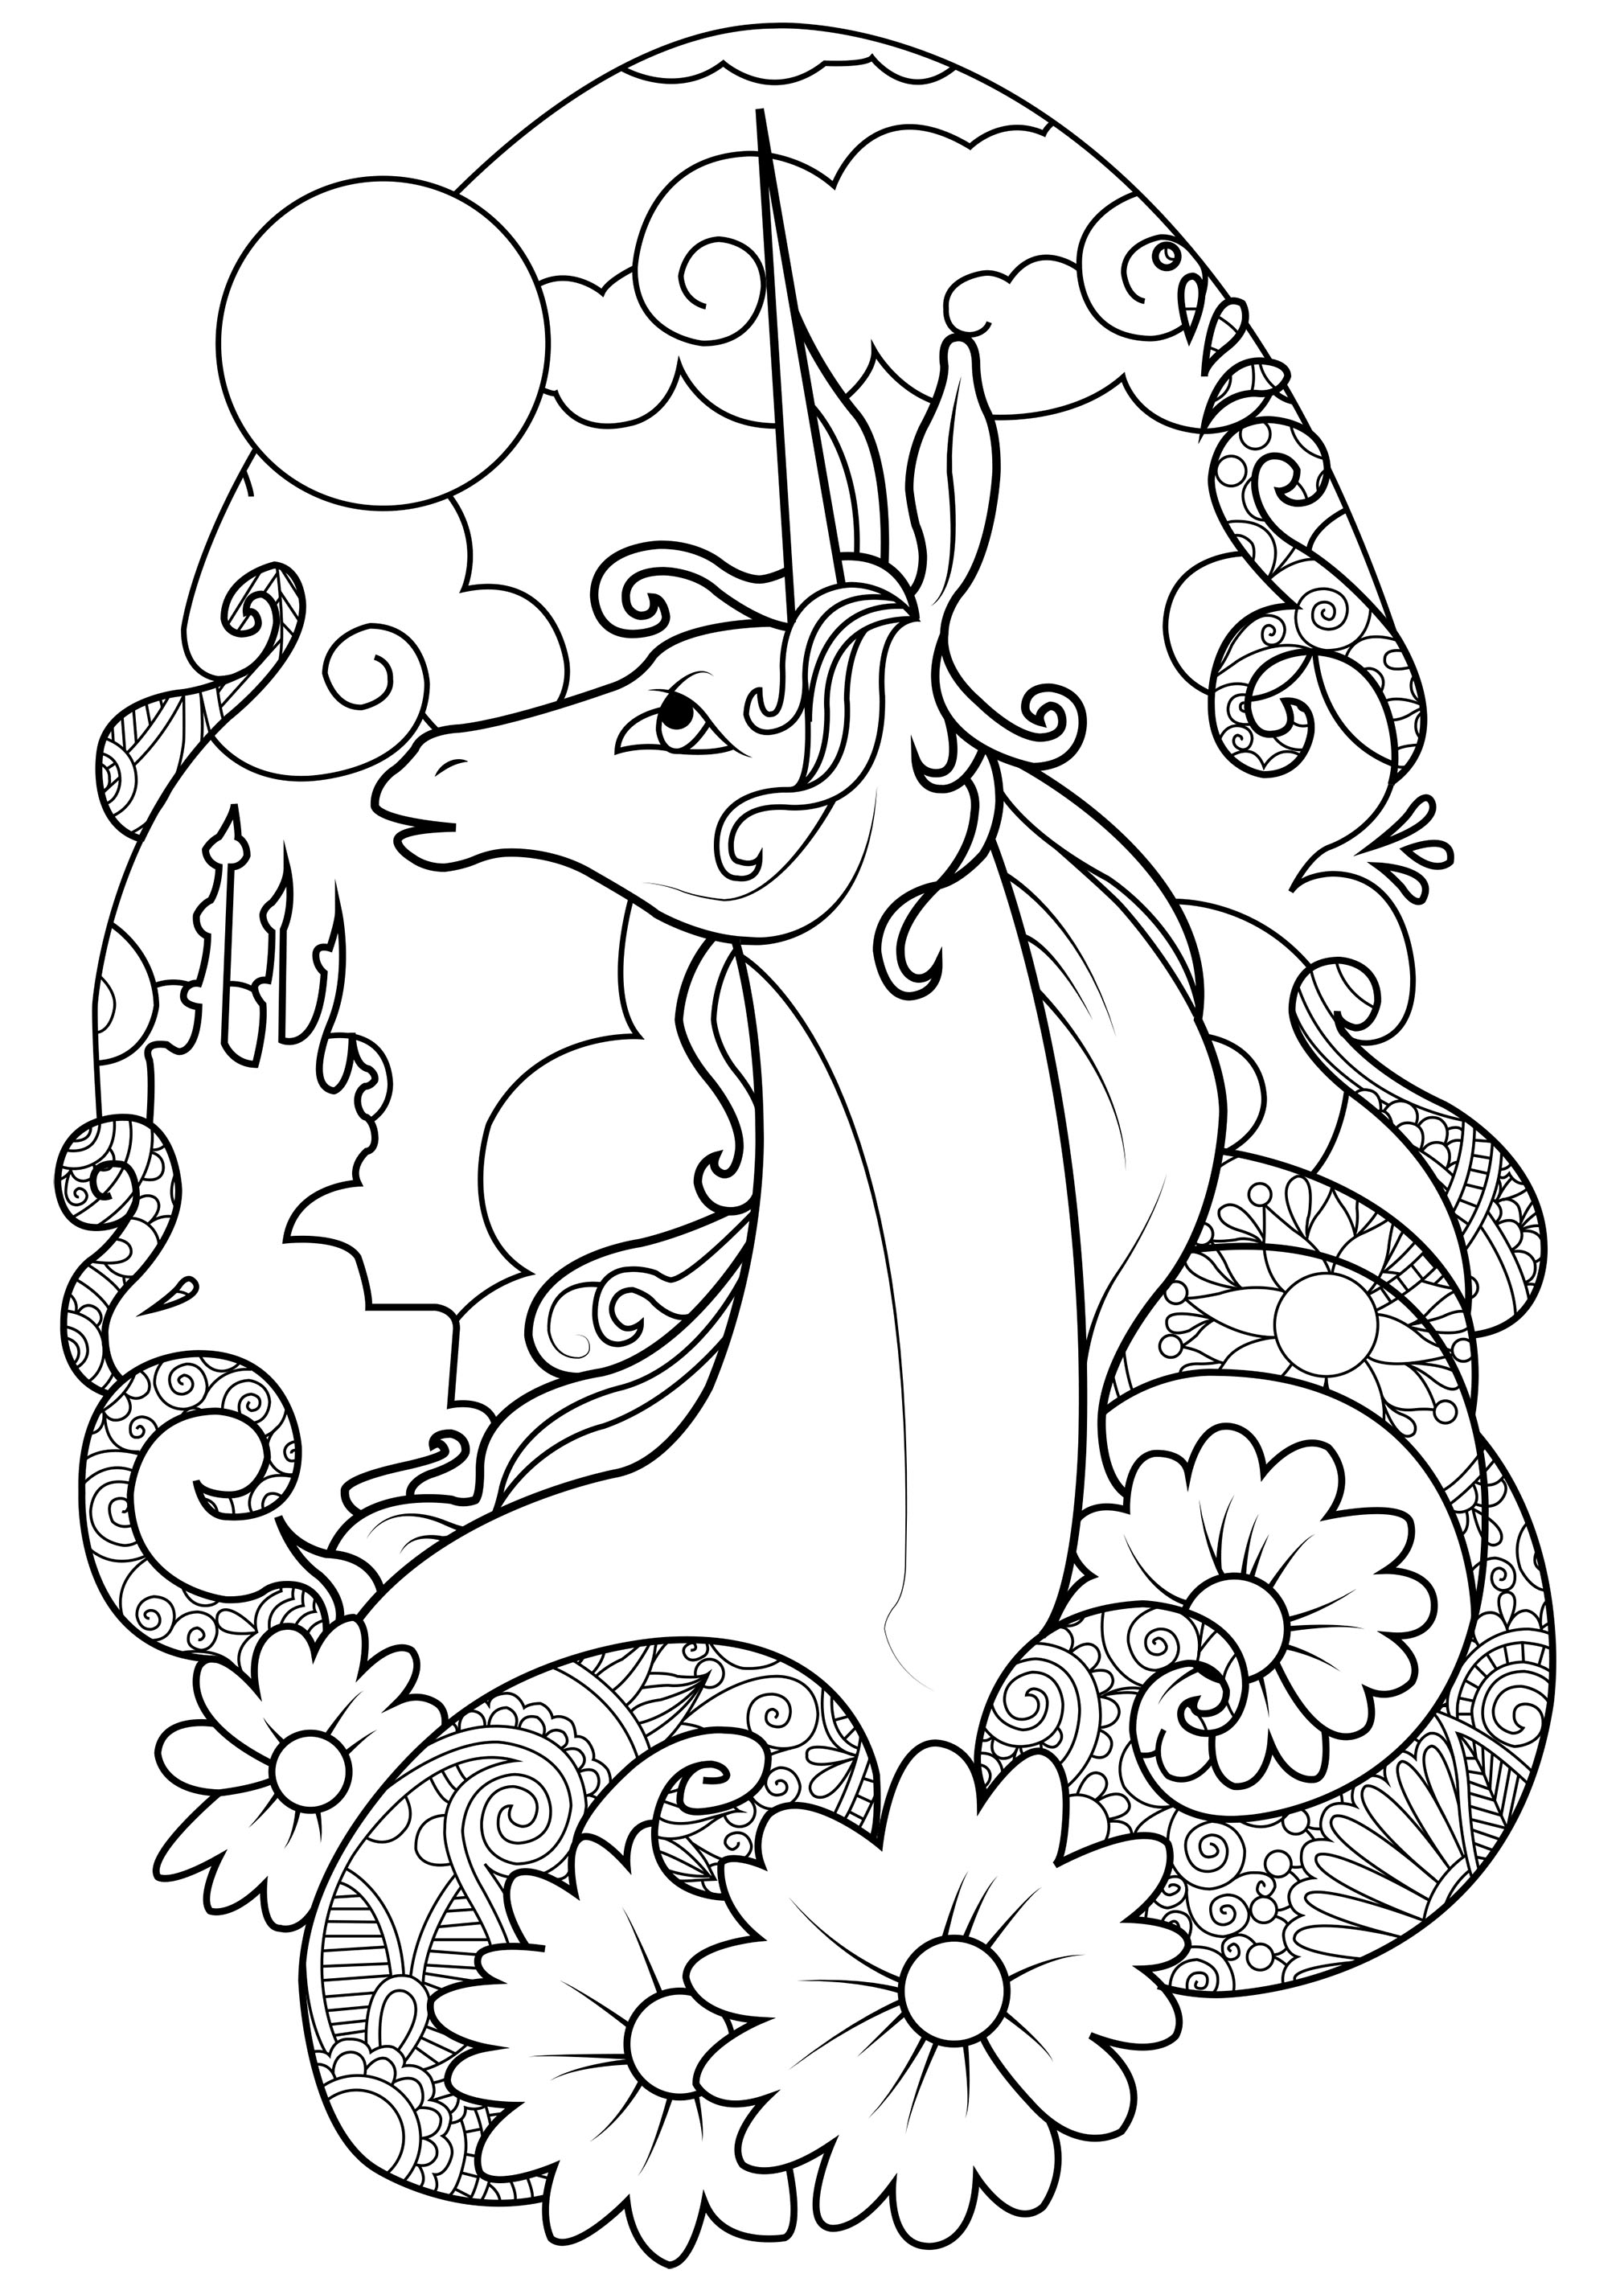 728 Cute Unicorn Doodle Coloring Pages with Printable